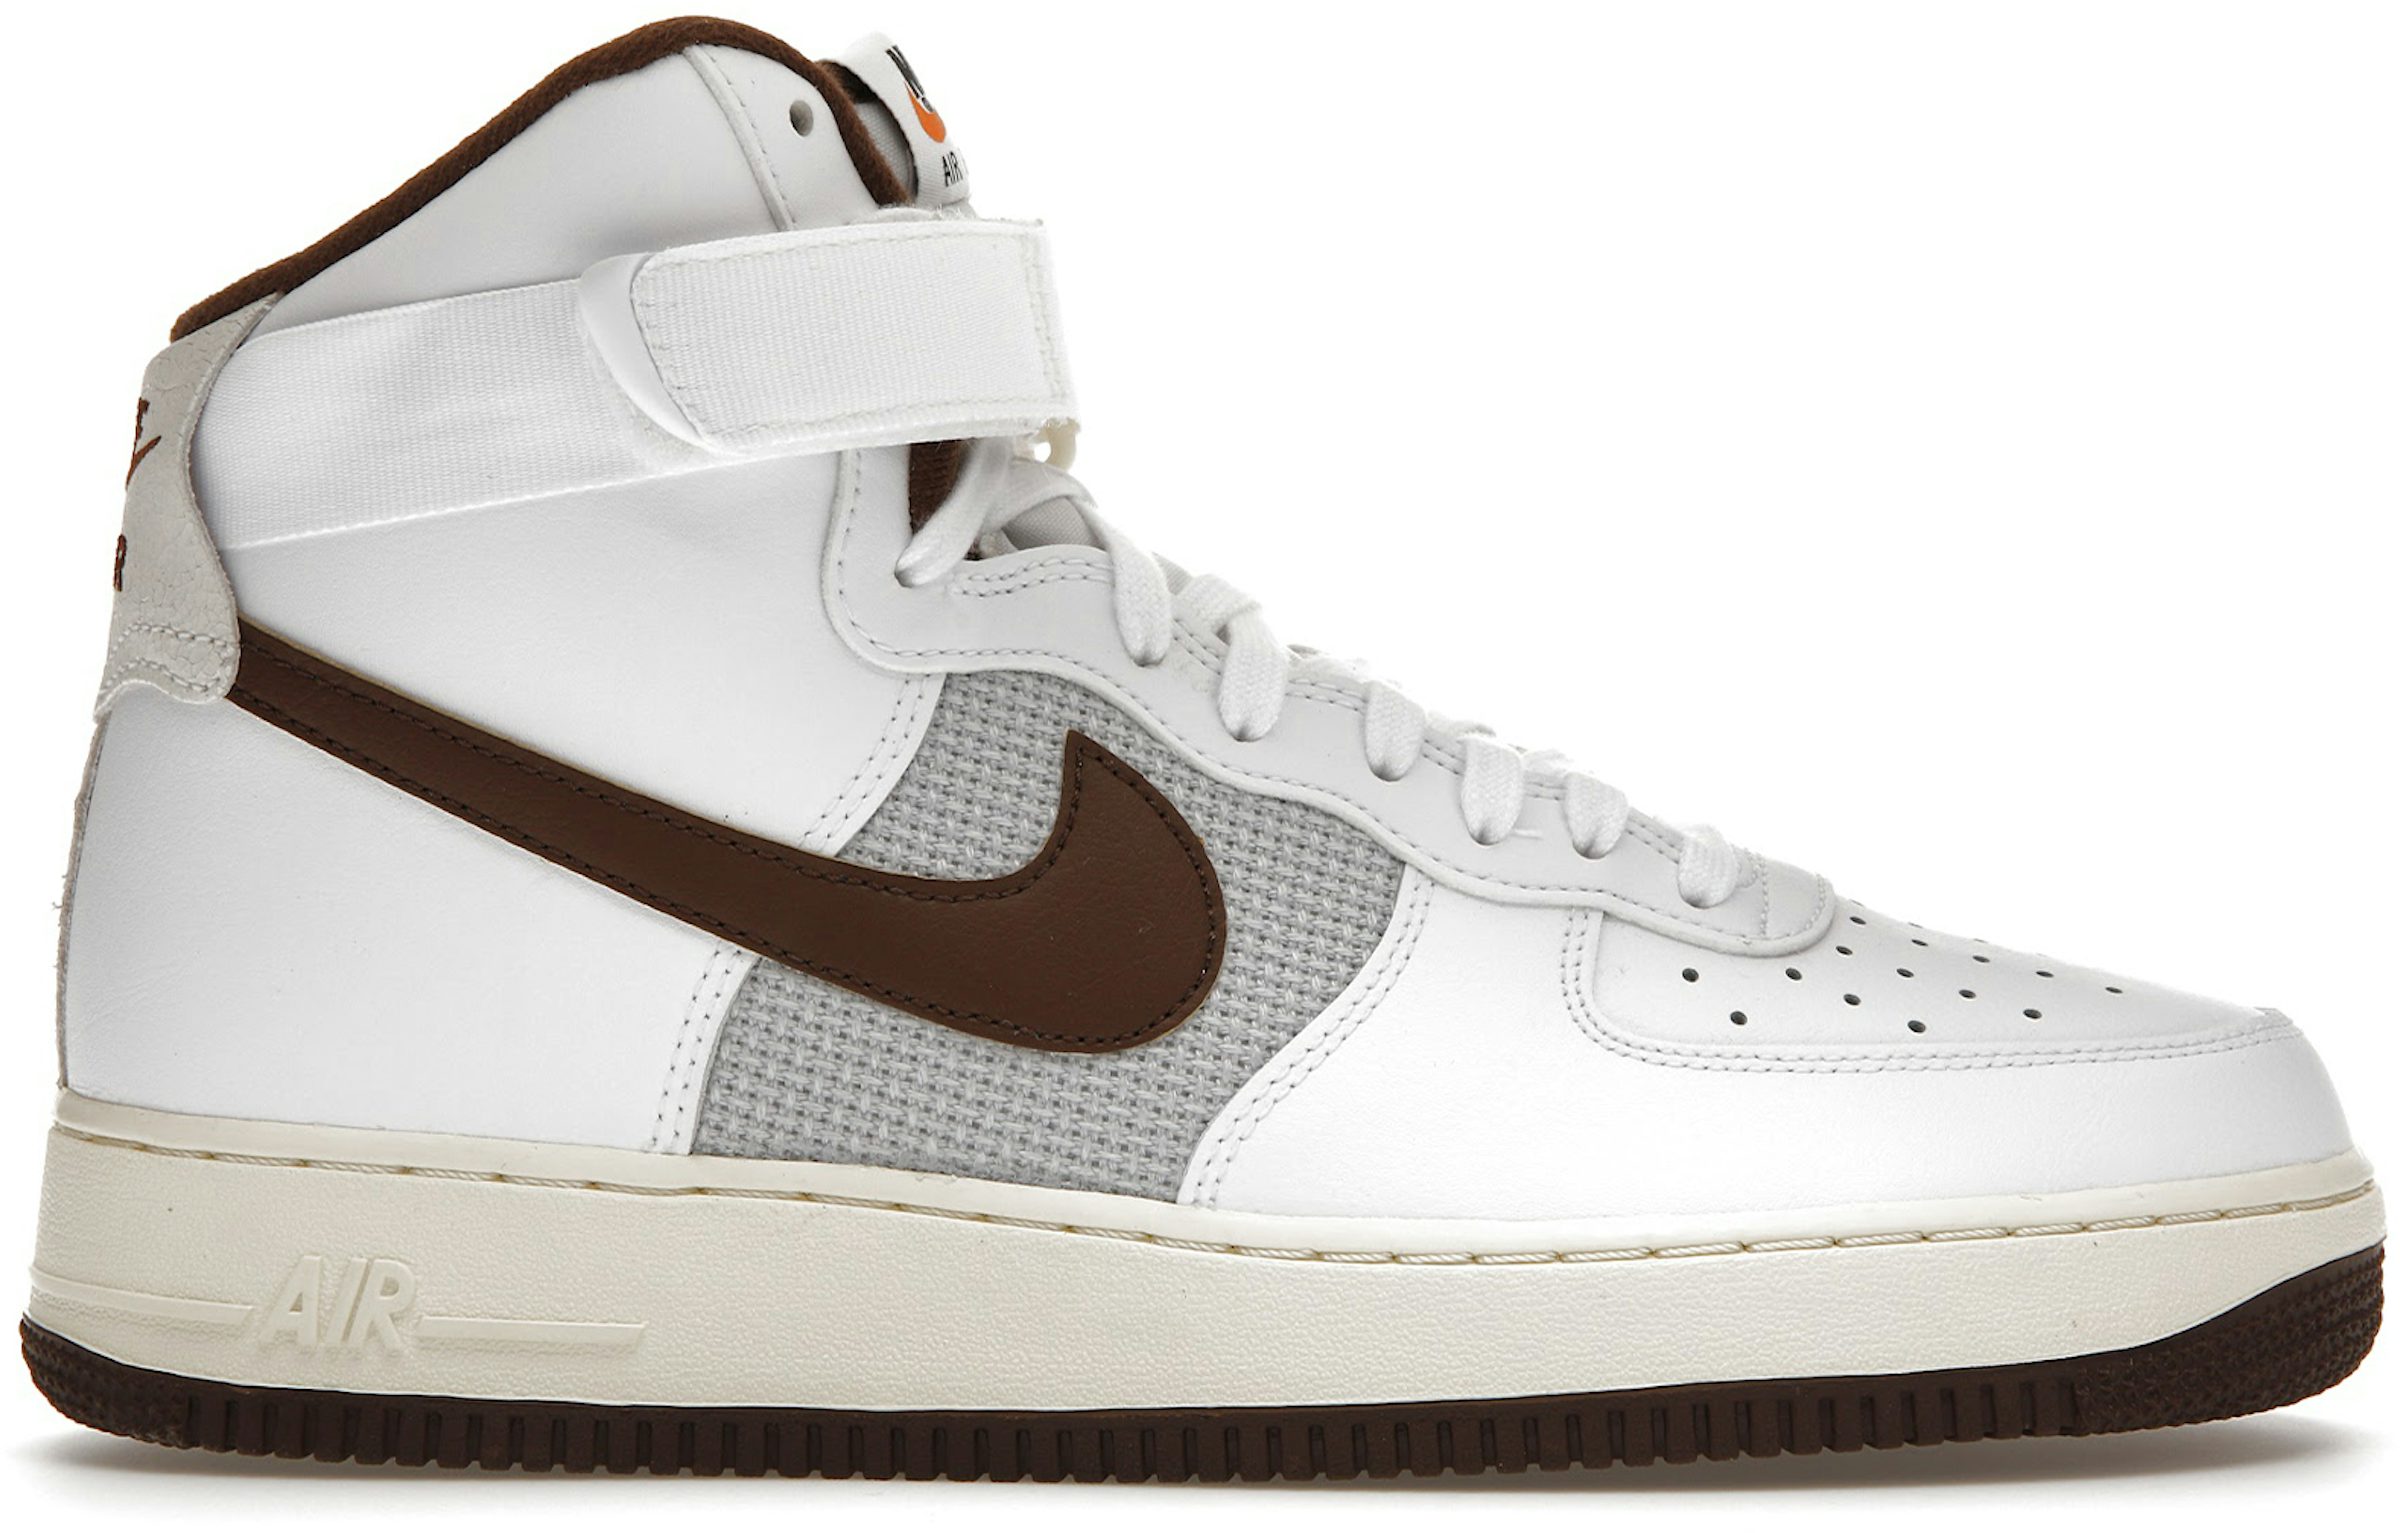 Additief Zaklampen tempo Nike Air Force 1 High '07 Vintage White Light Chocolate Men's - DM0209-101  - US